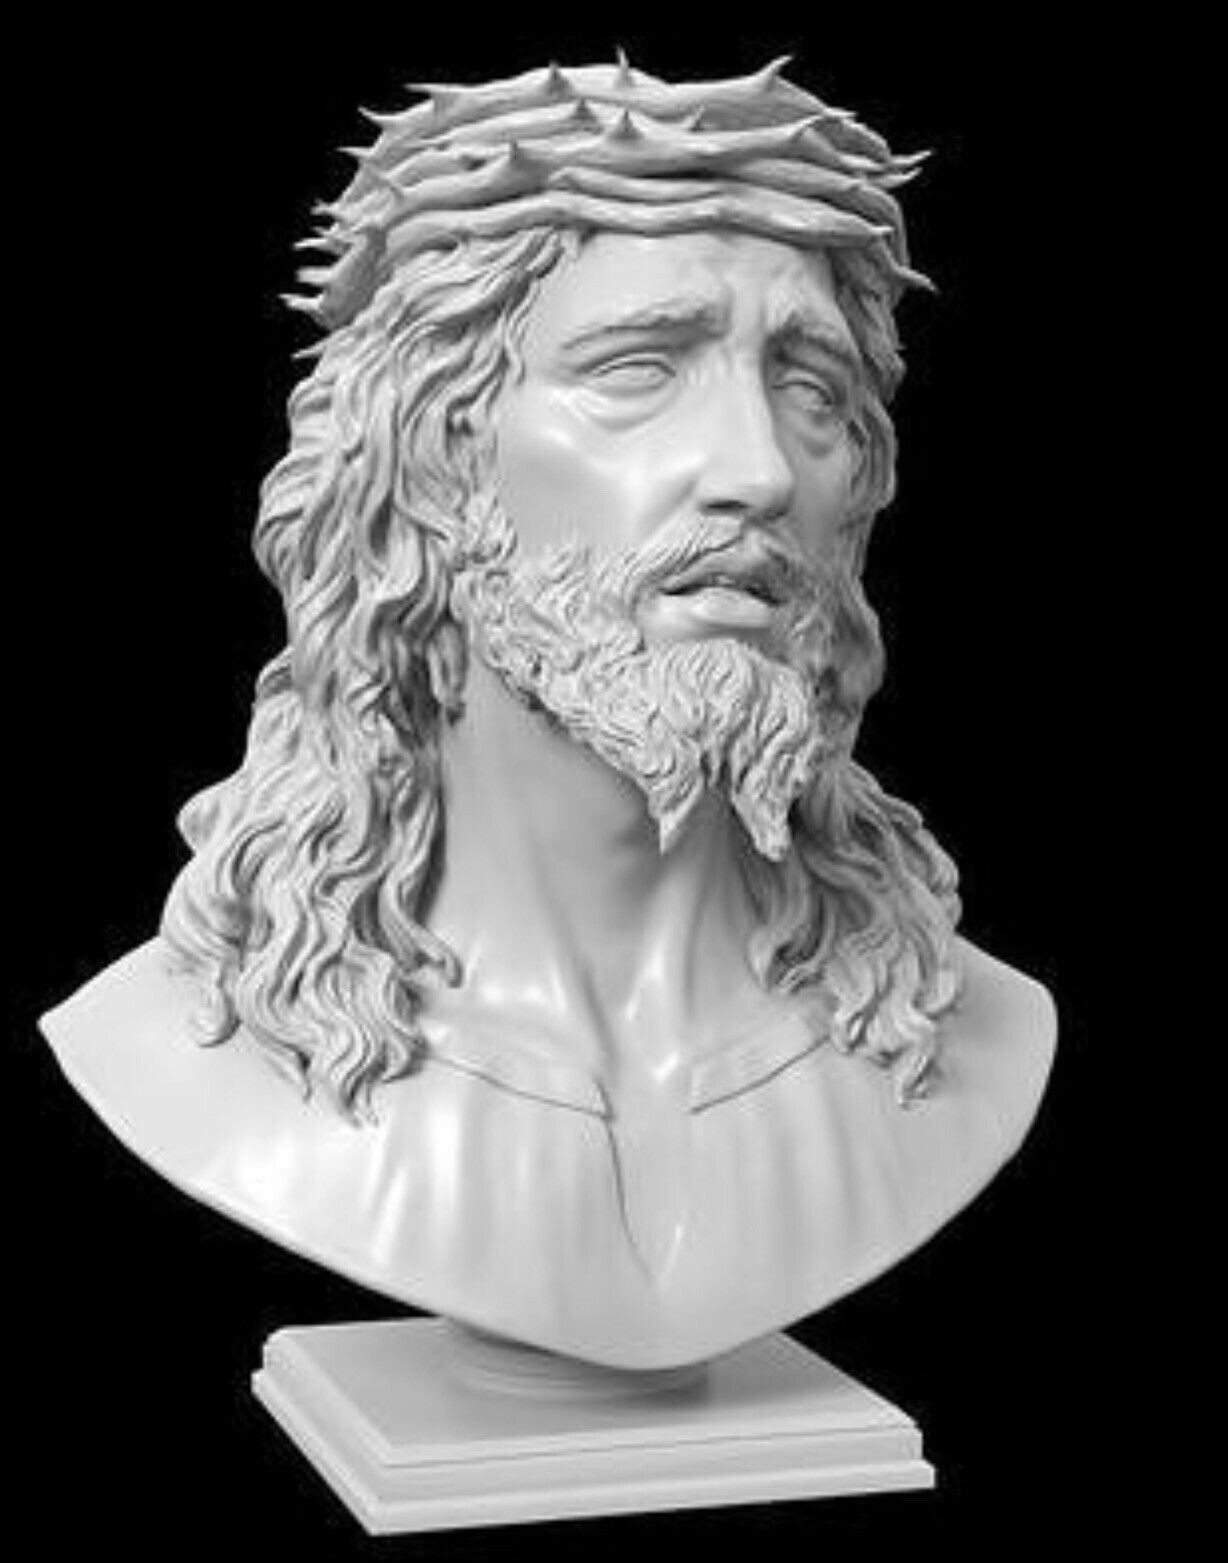 SUPER MASSIVE  2 Foot🦶 Tall Bust Of Jesus Christ With Thorne Crown